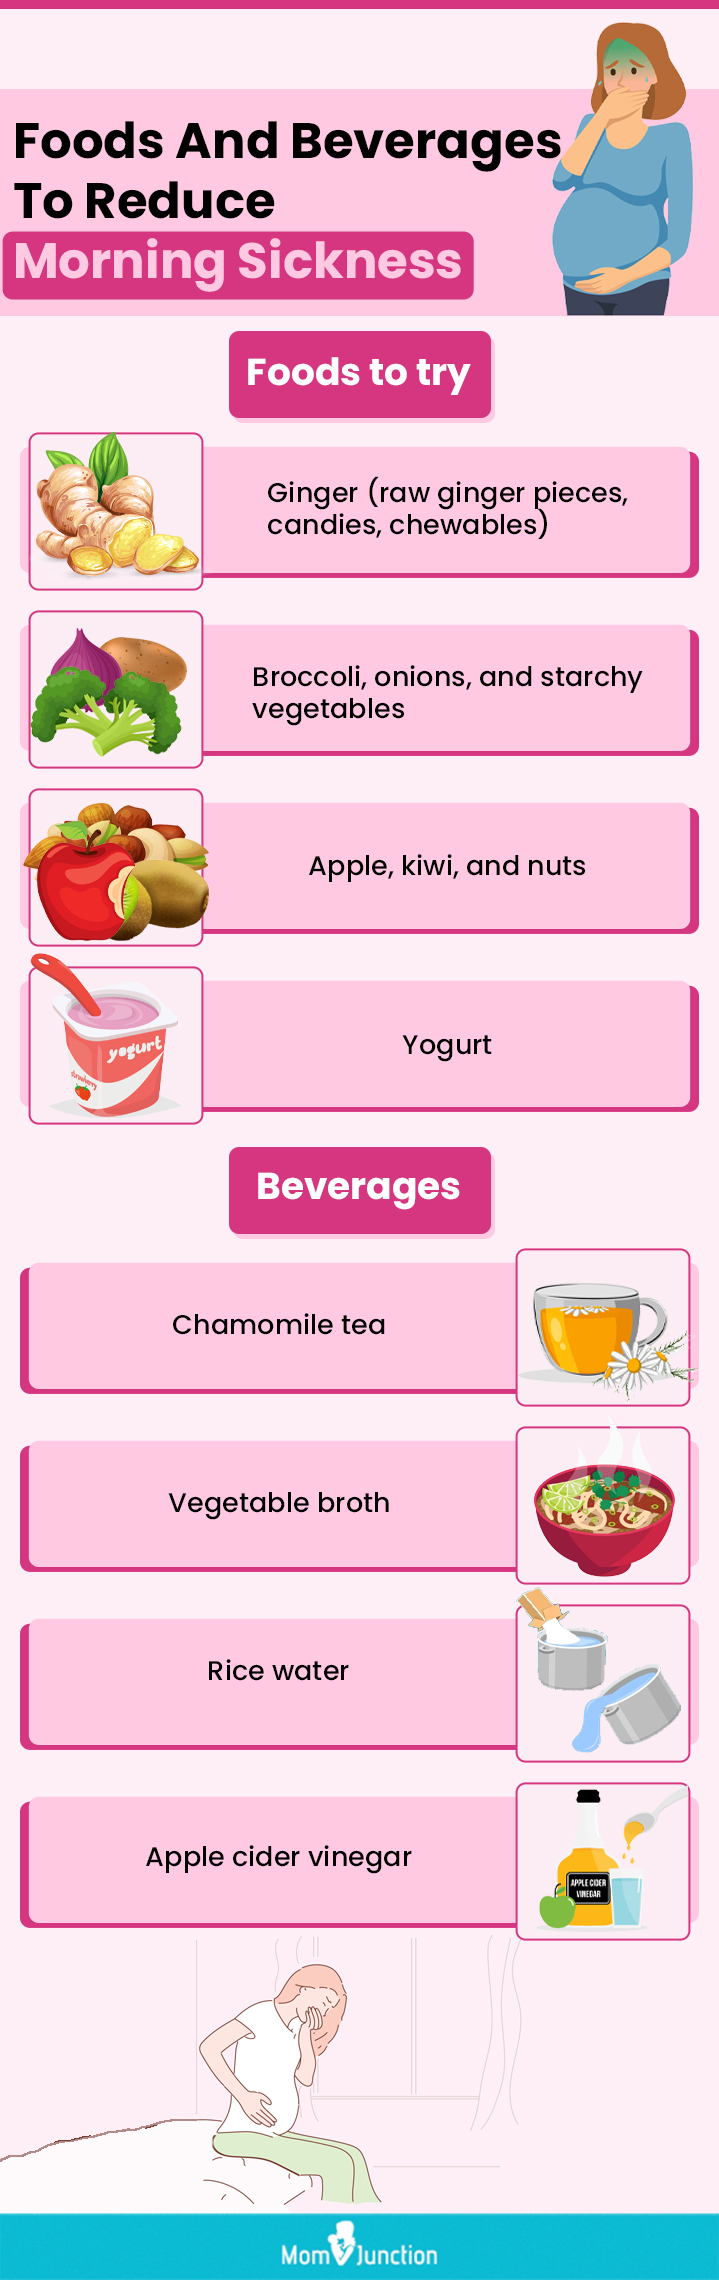 foods and beverages to reduce morning sickness (infographic)